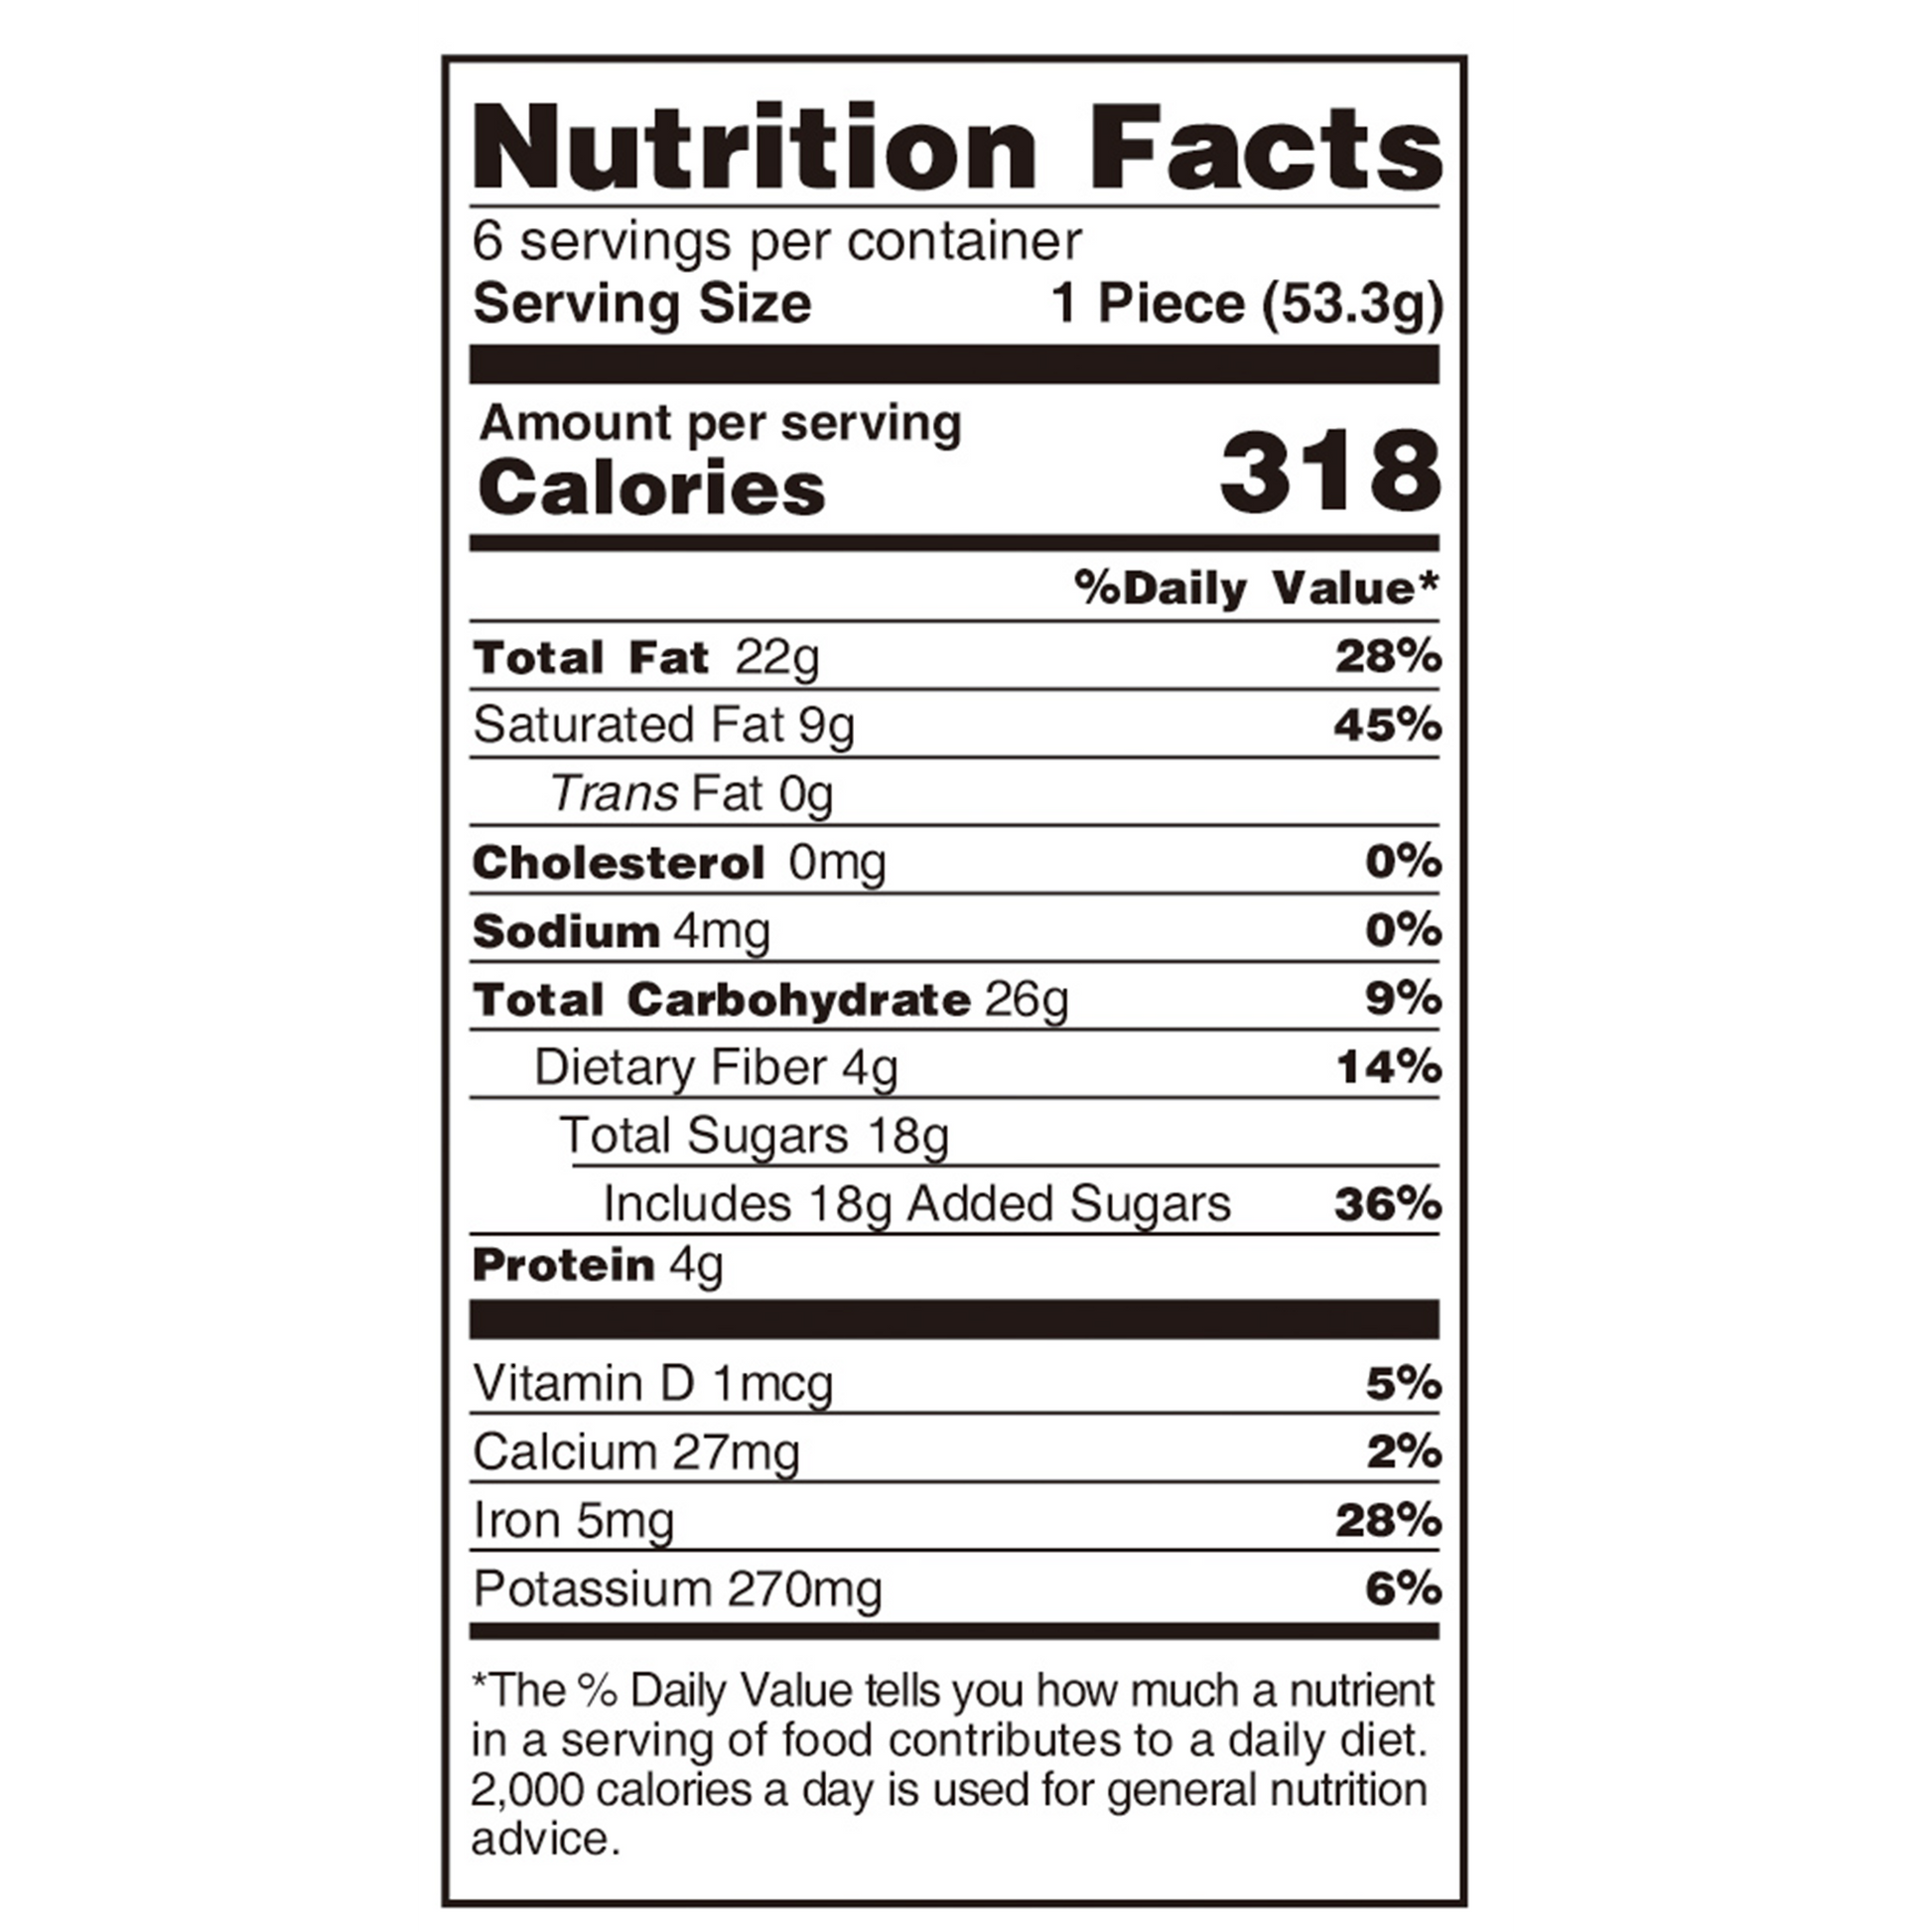 Image of the nutrition facts 